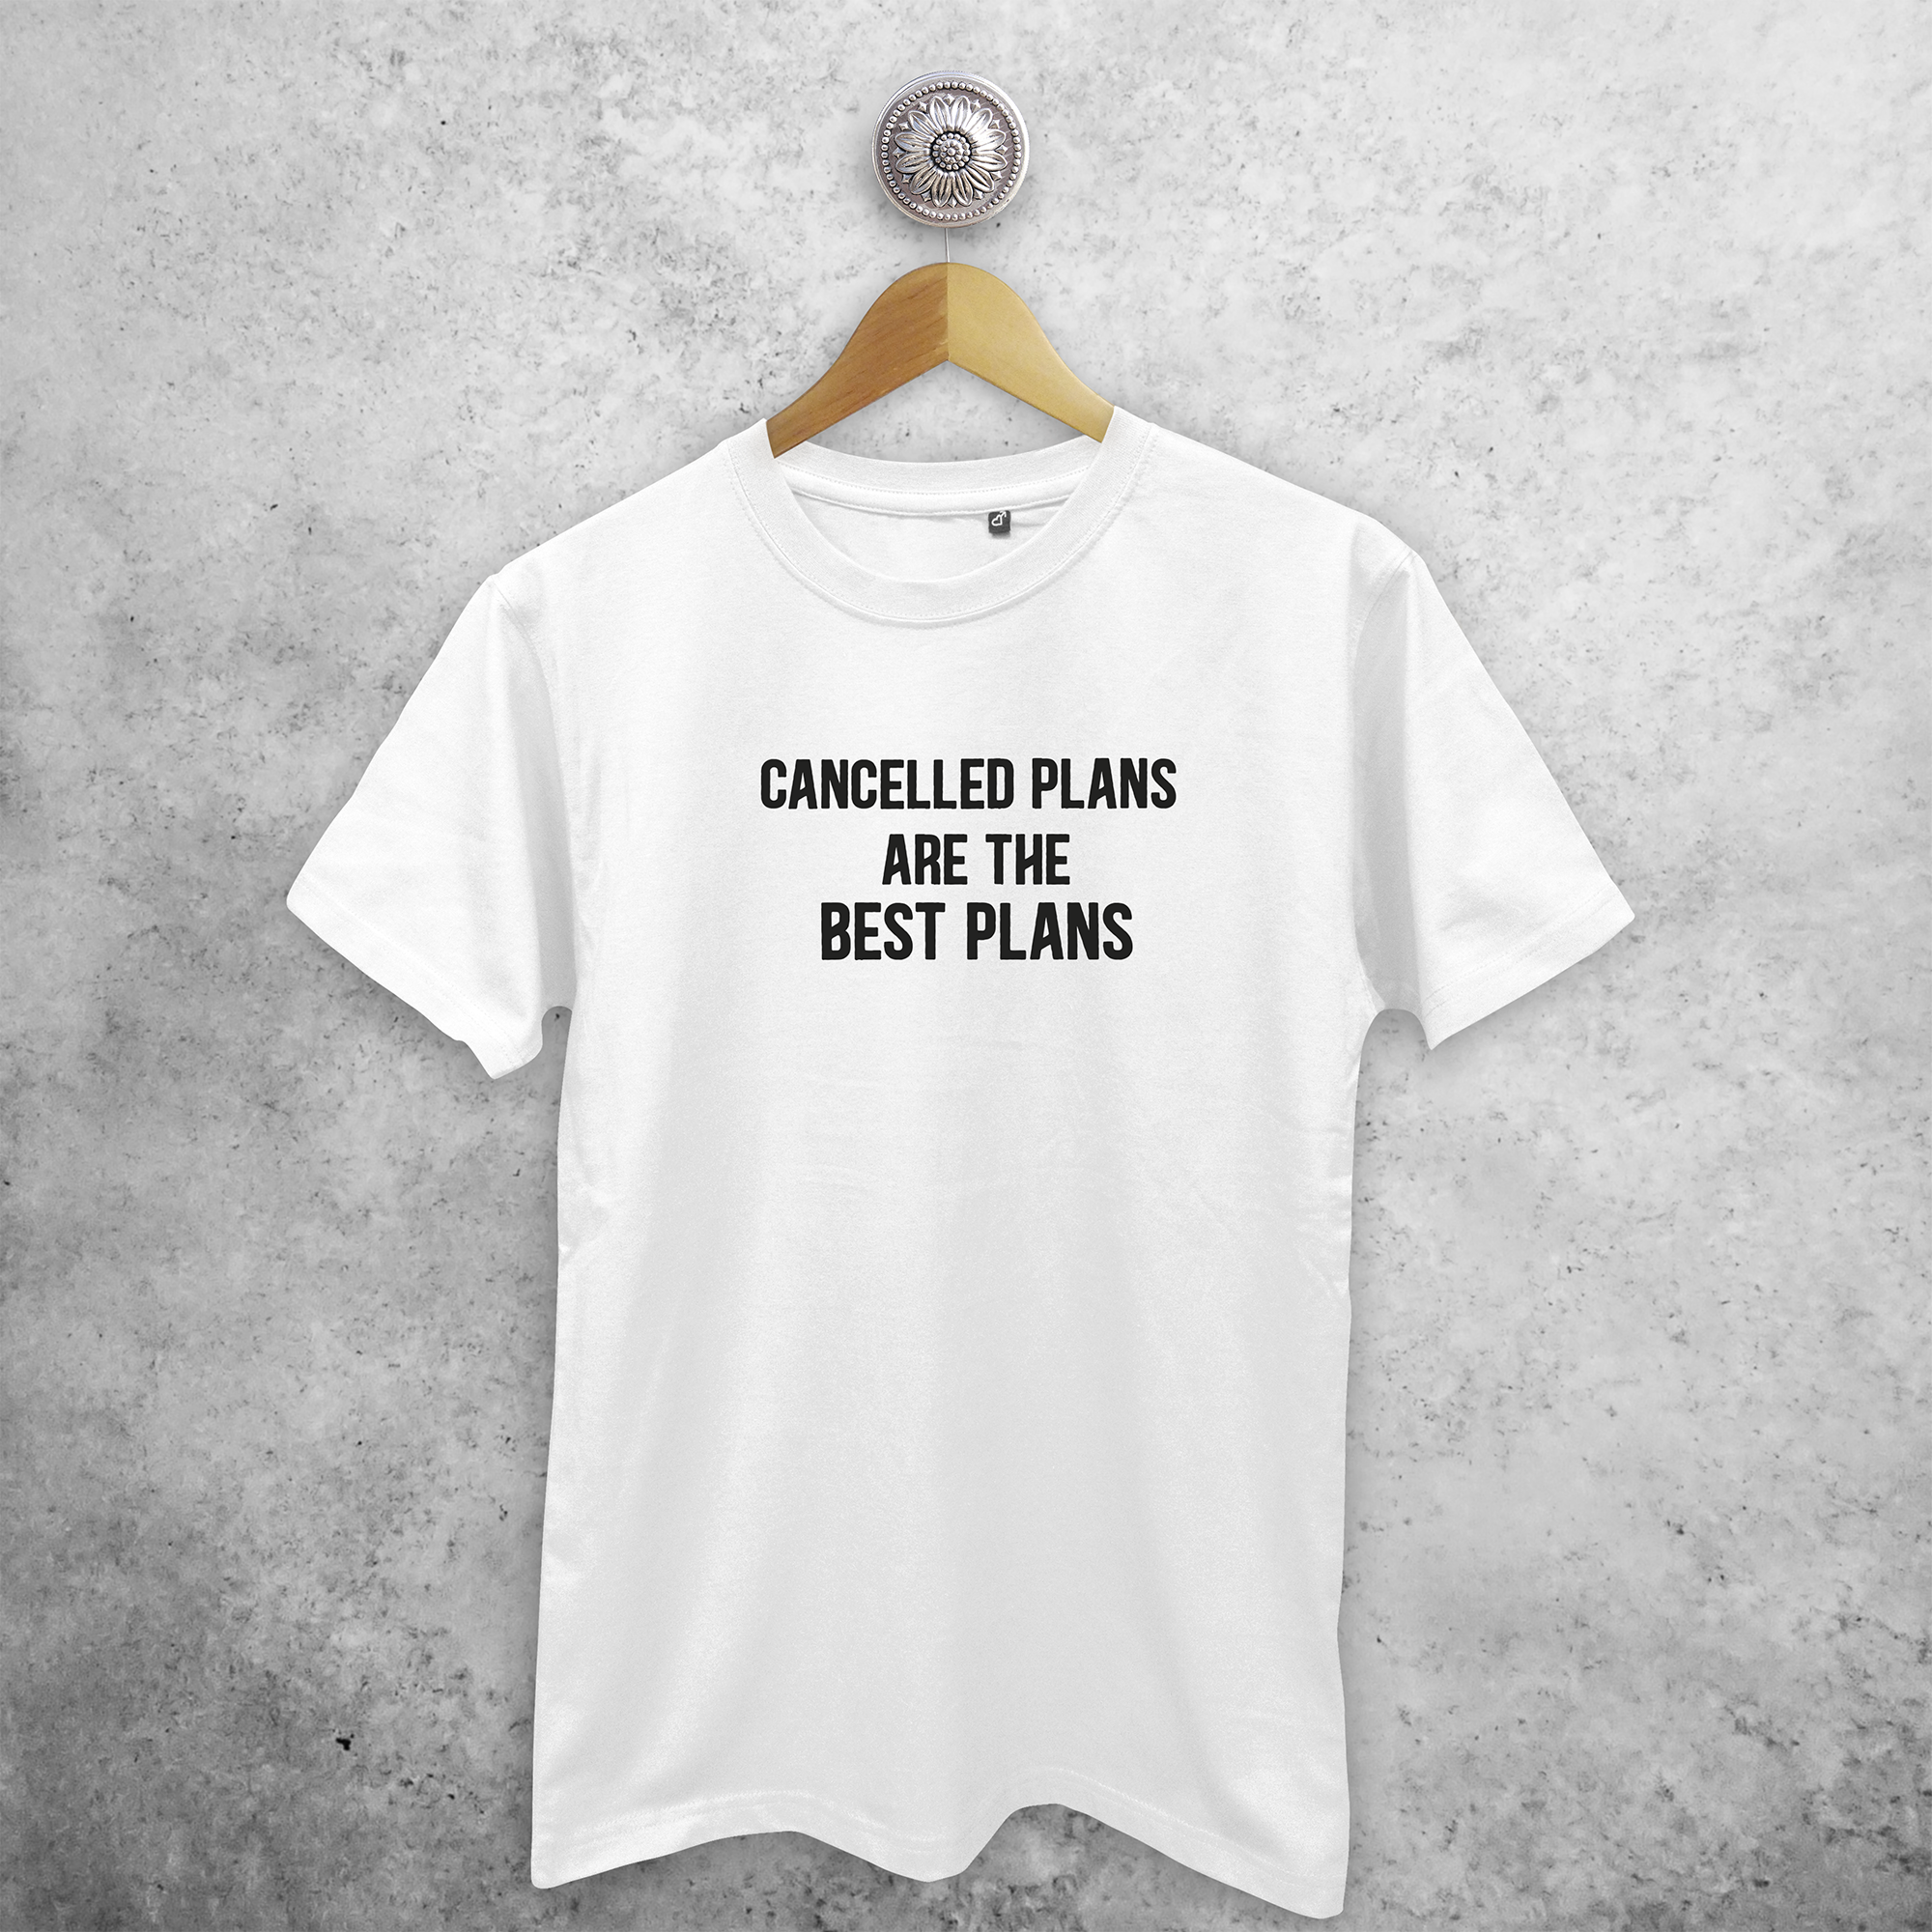 'Cancelled plans are the best plans' volwassene shirt